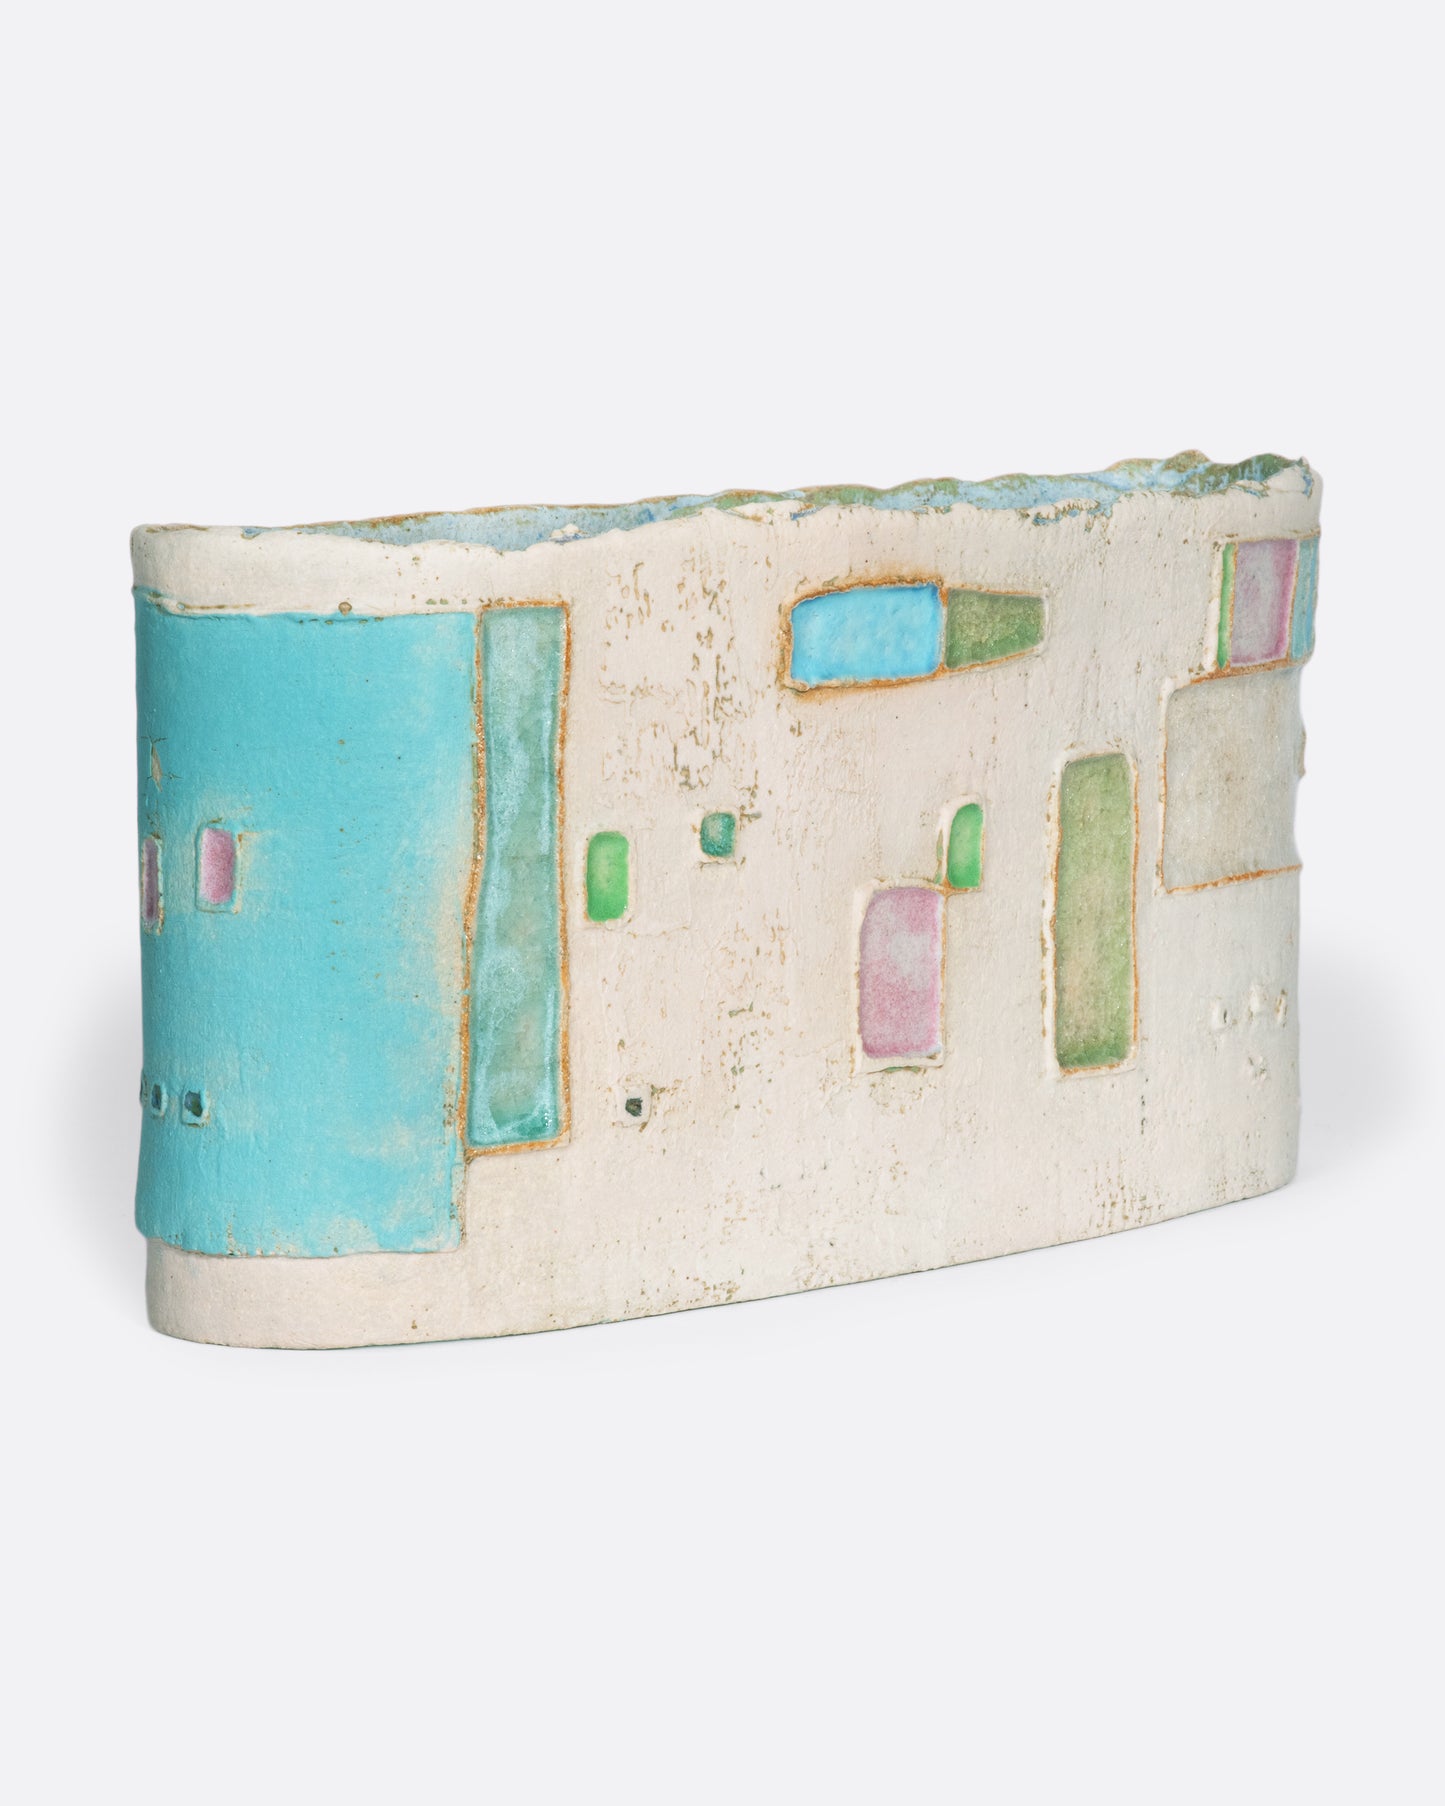 A ceramic vessel meticulously handmade with many layers of glaze atop stoneware clay. The rich, varied texture becomes a beautiful canvas for a dreamy slice of a sun-drenched town in Greece.